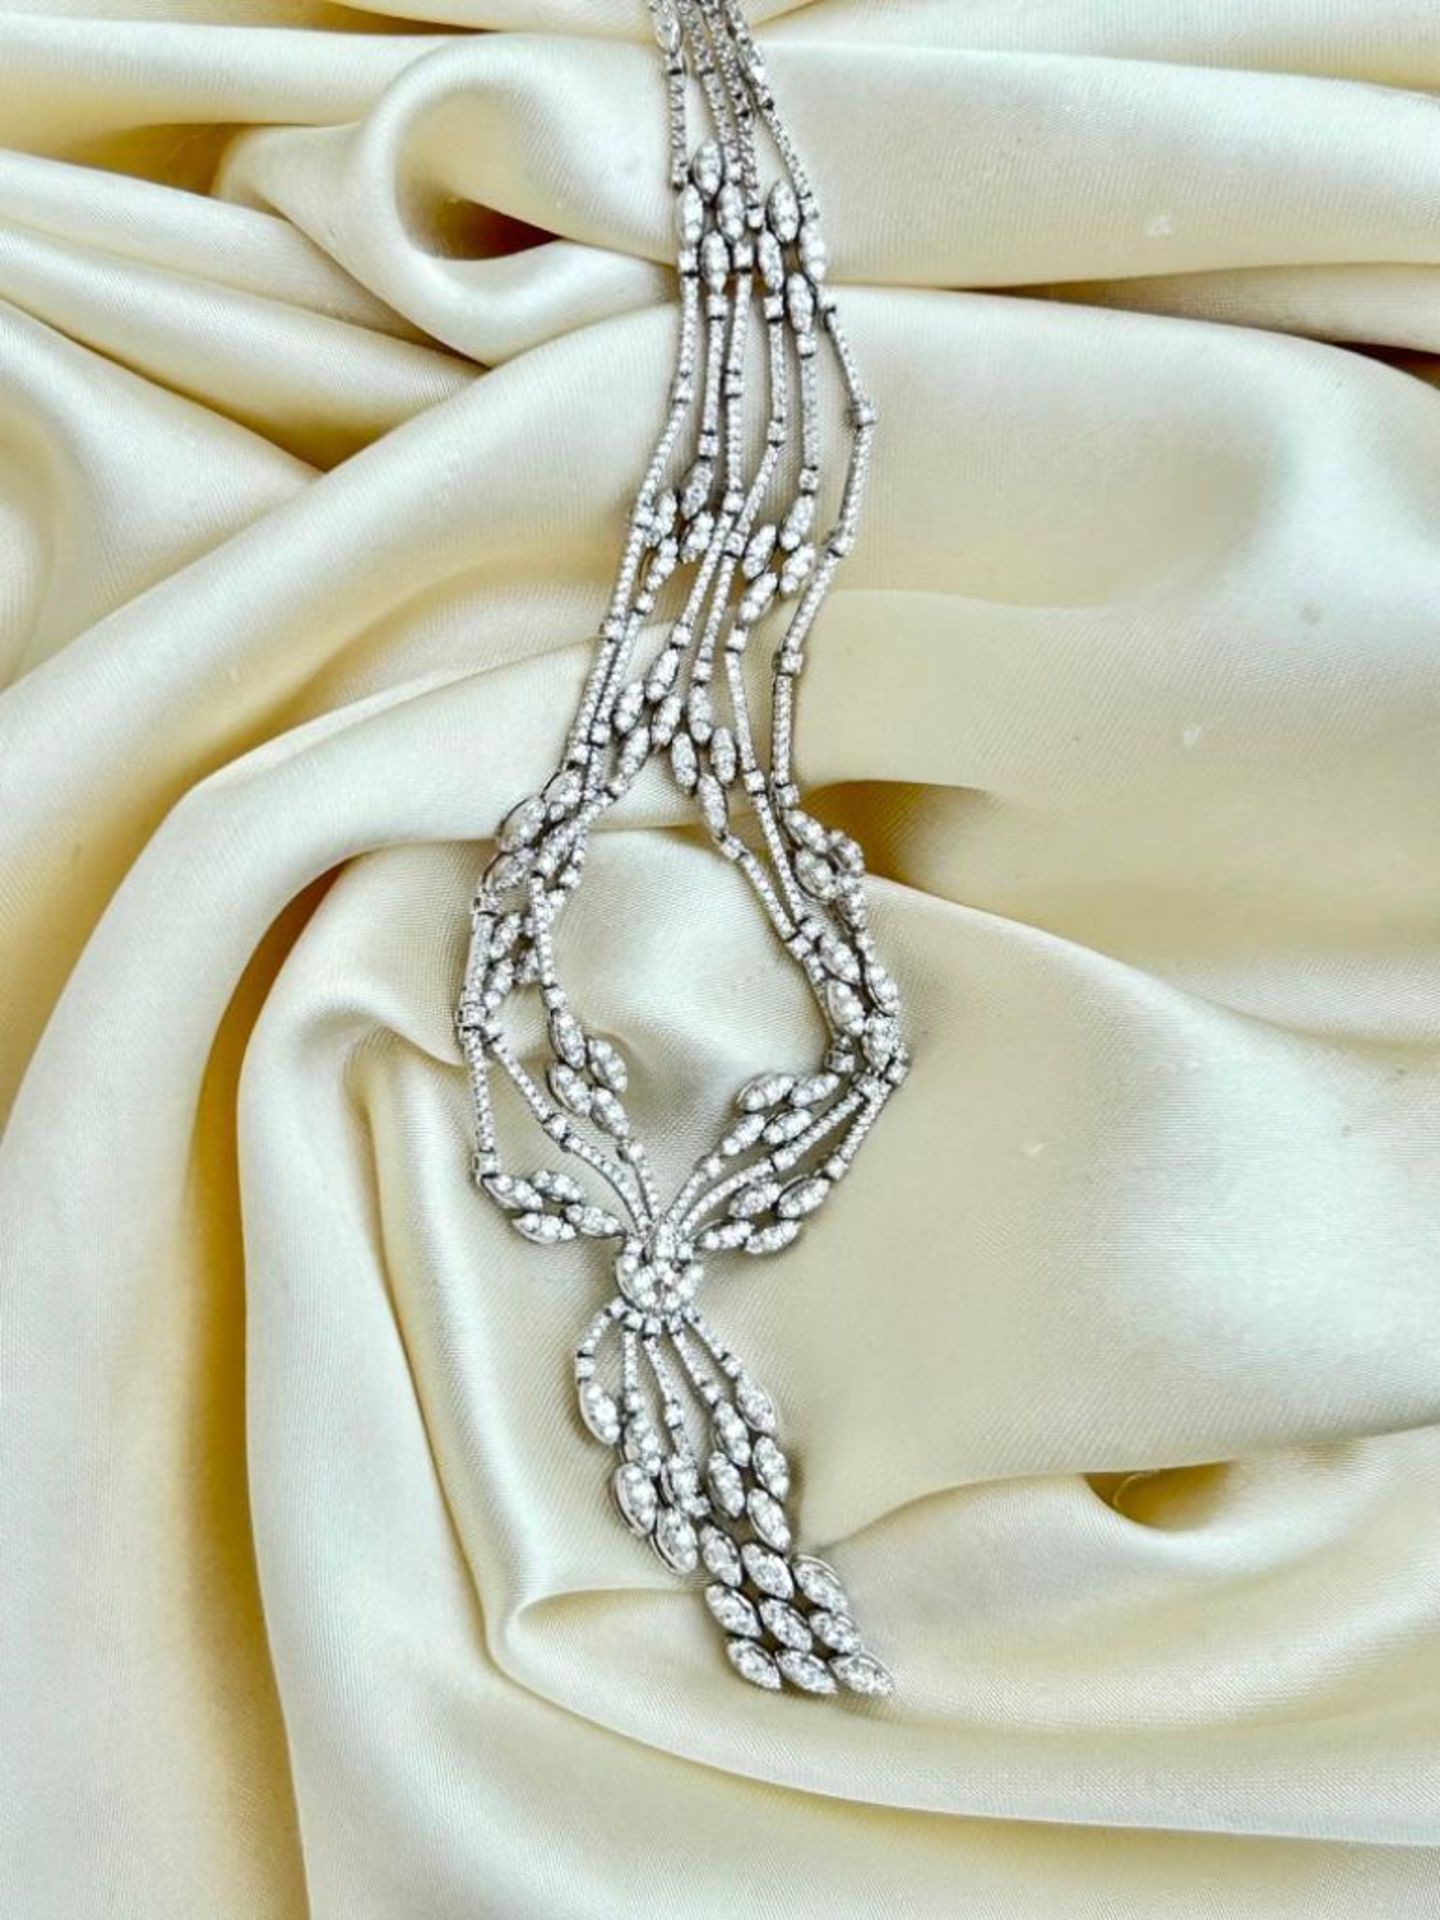 18ct White Gold and 10 Carat Plus Diamond Necklace - Image 6 of 14